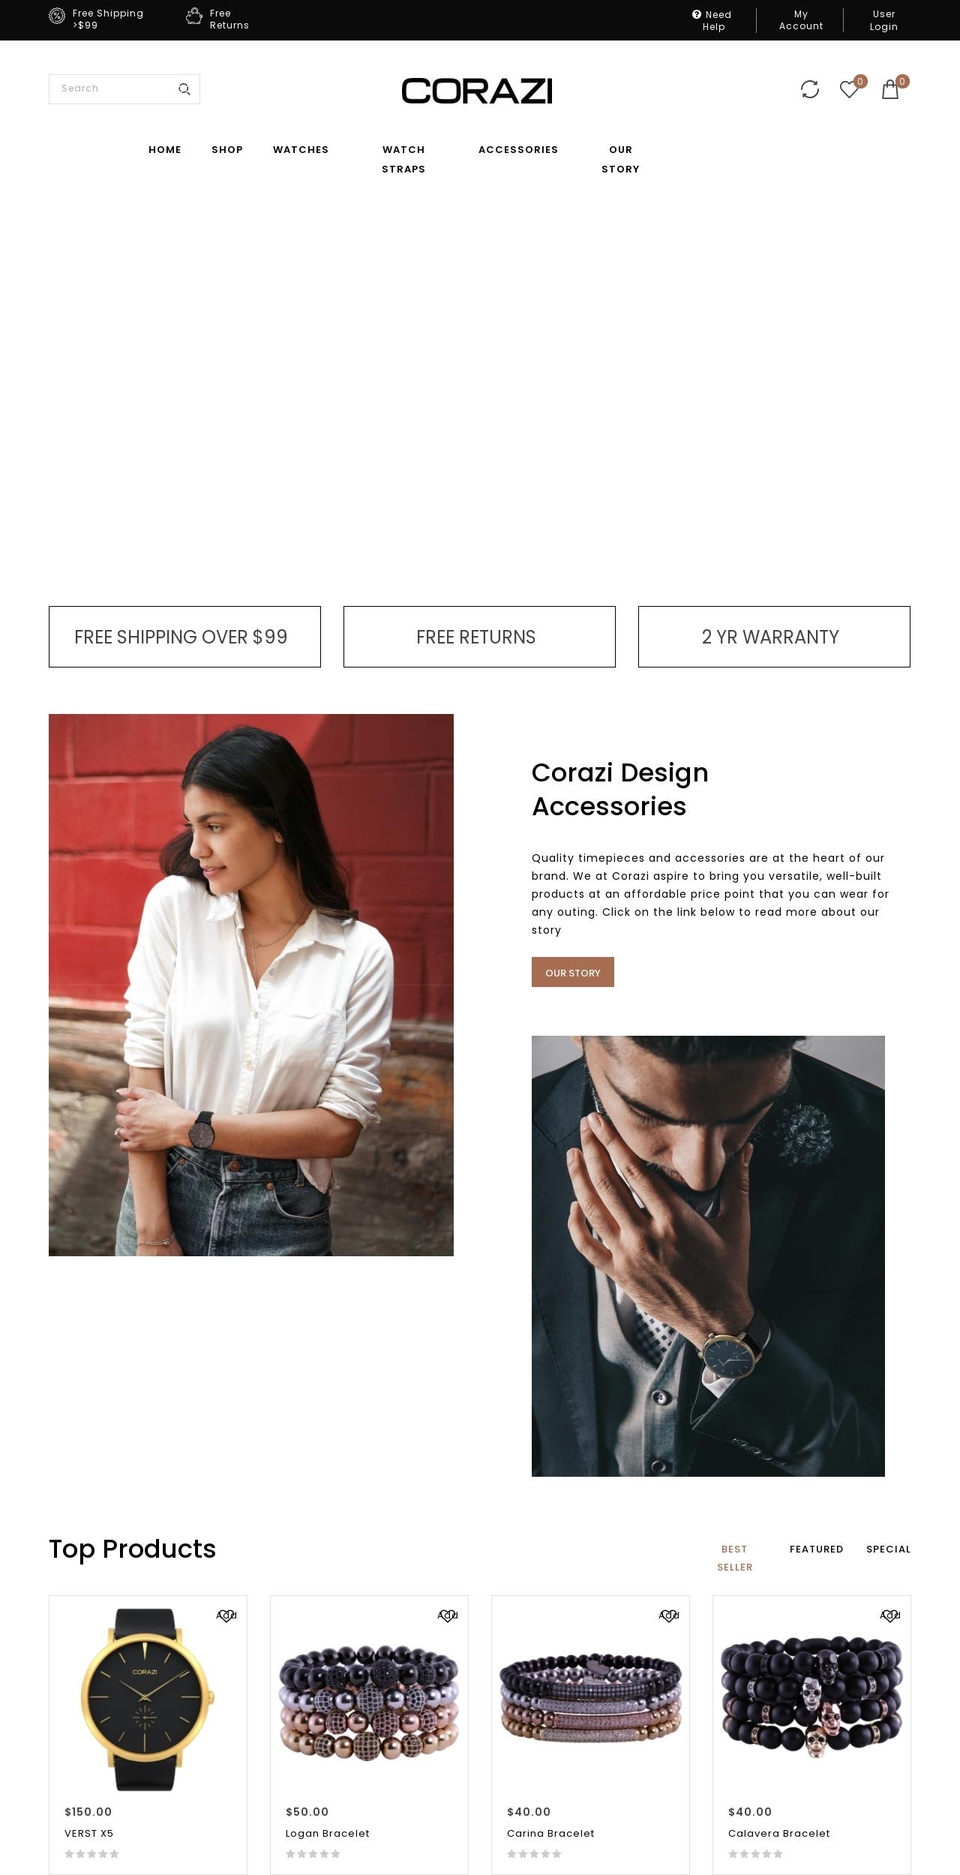 OOTS Support Shopify theme site example corazi.com